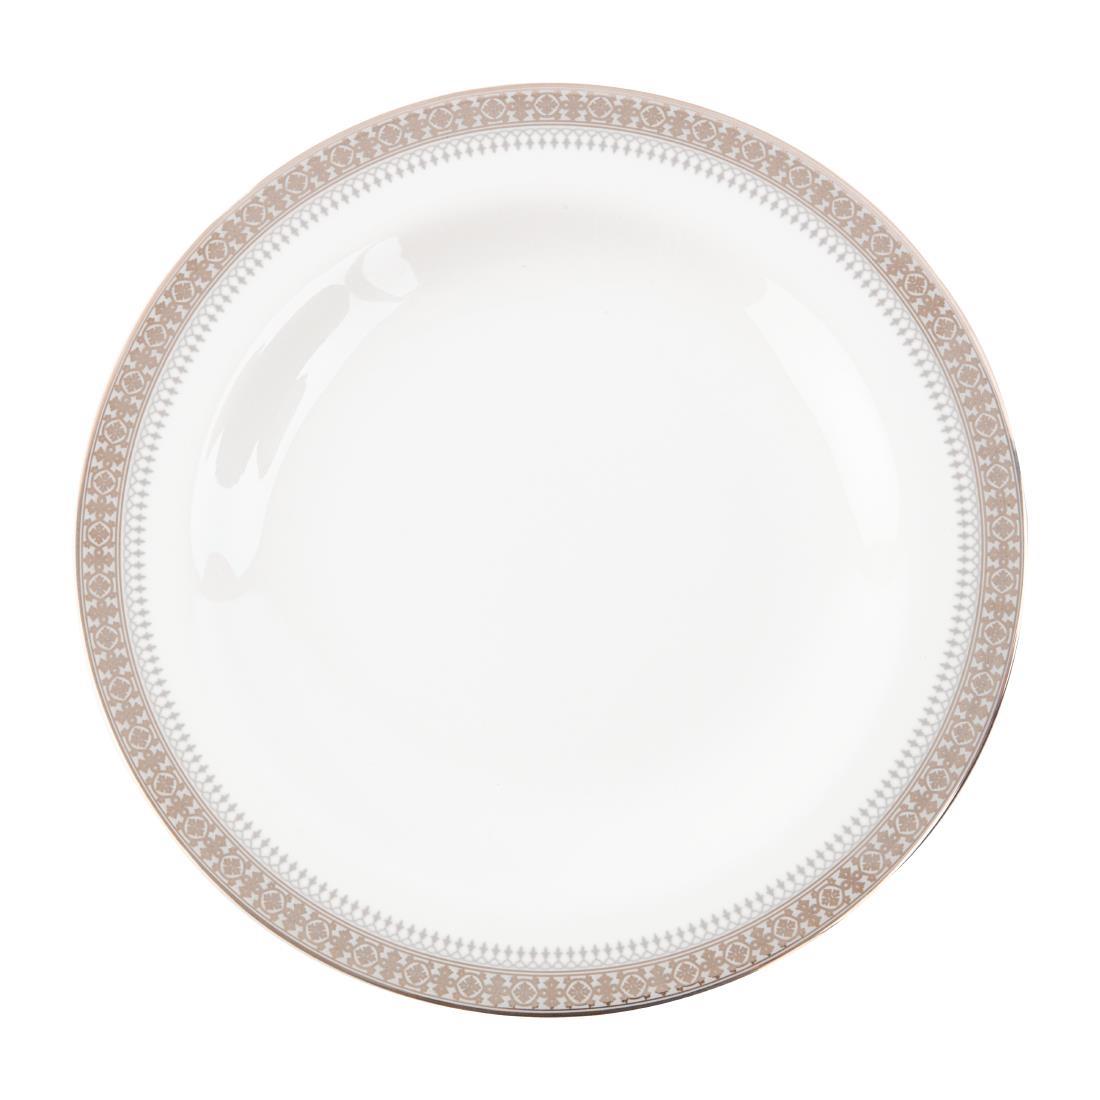 Royal Bone Afternoon Tea Couronne Plate 210mm (Pack of 12) - FB740  - 1